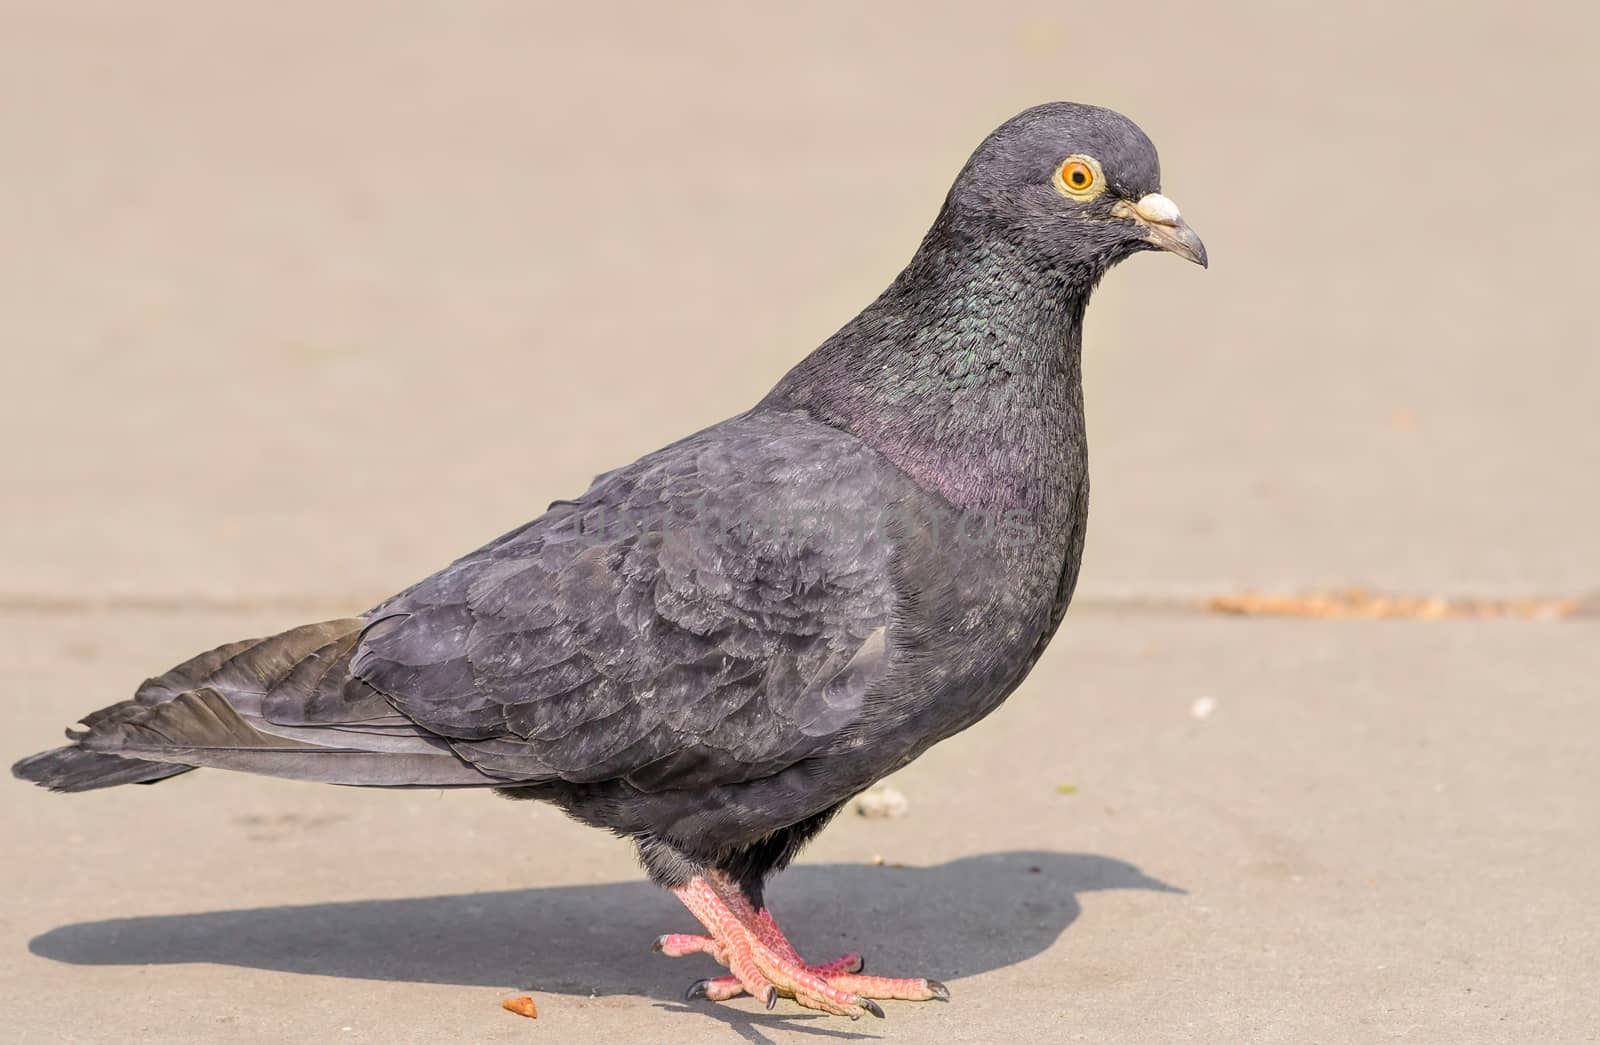 A gray pigeon is walking on the pathway in the park